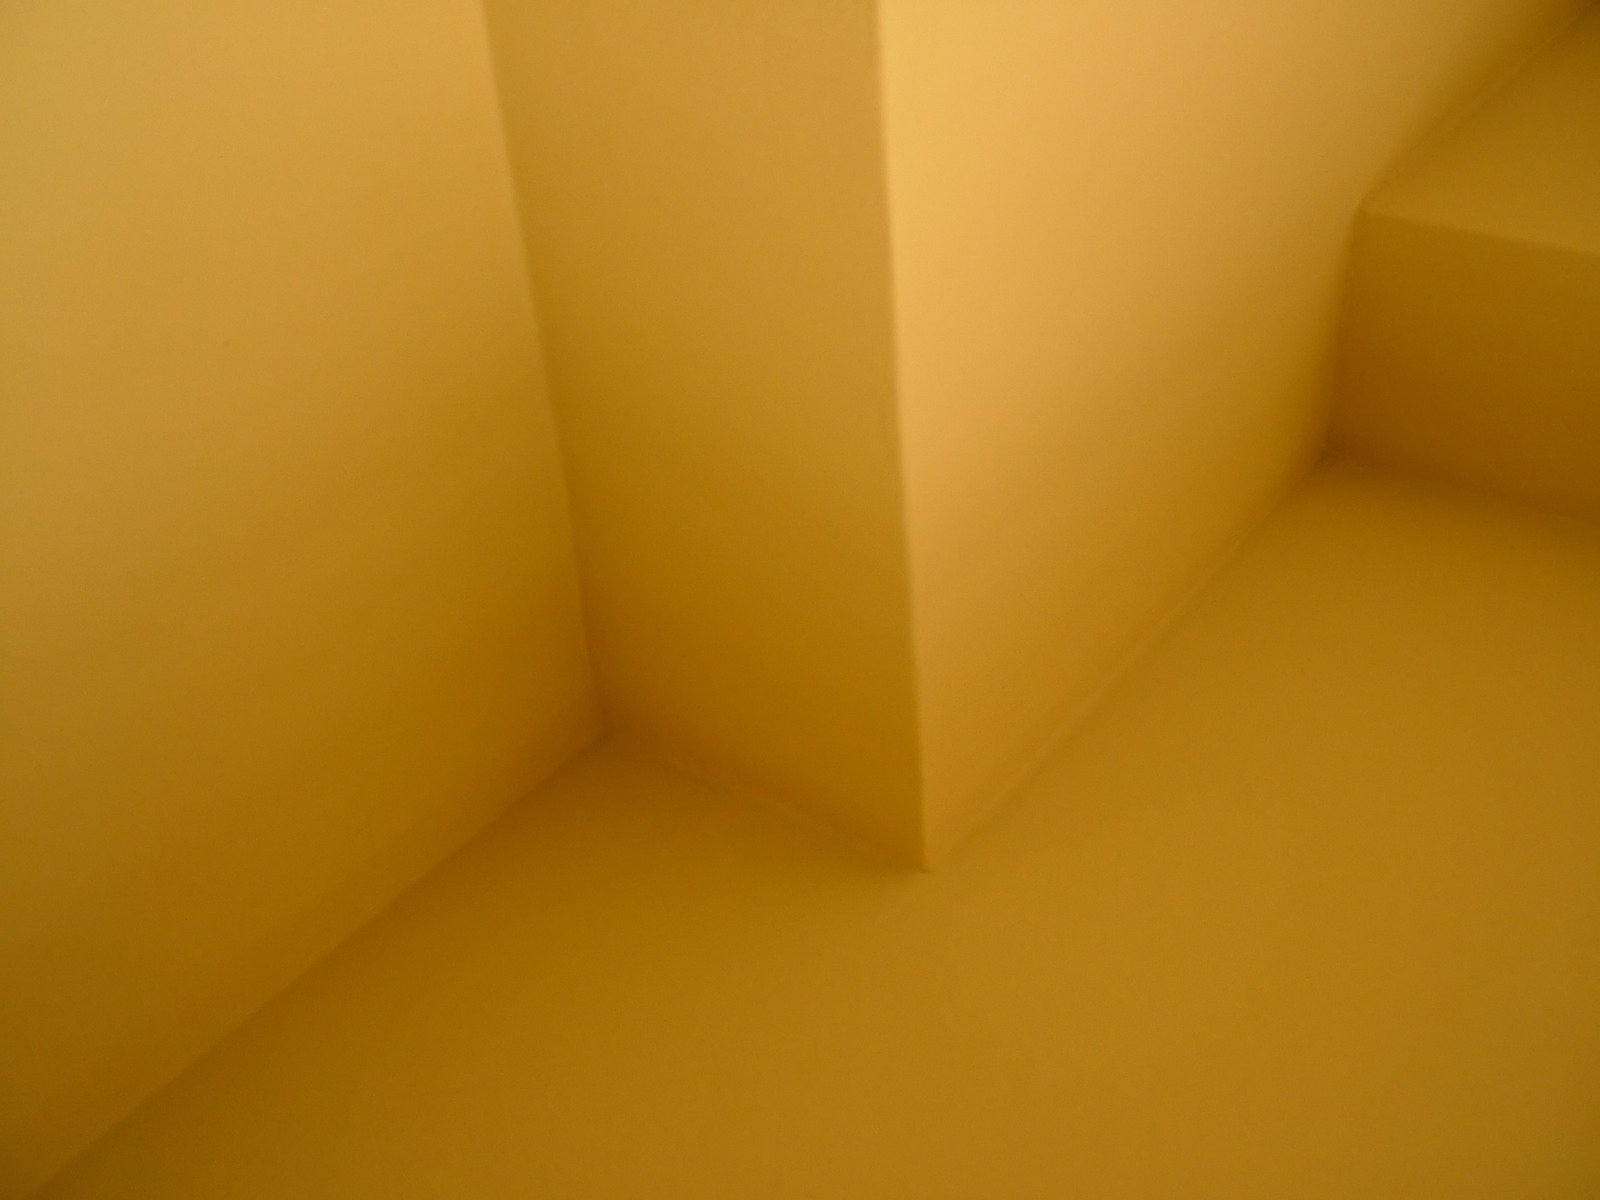 a white corner on the wall with light coming through